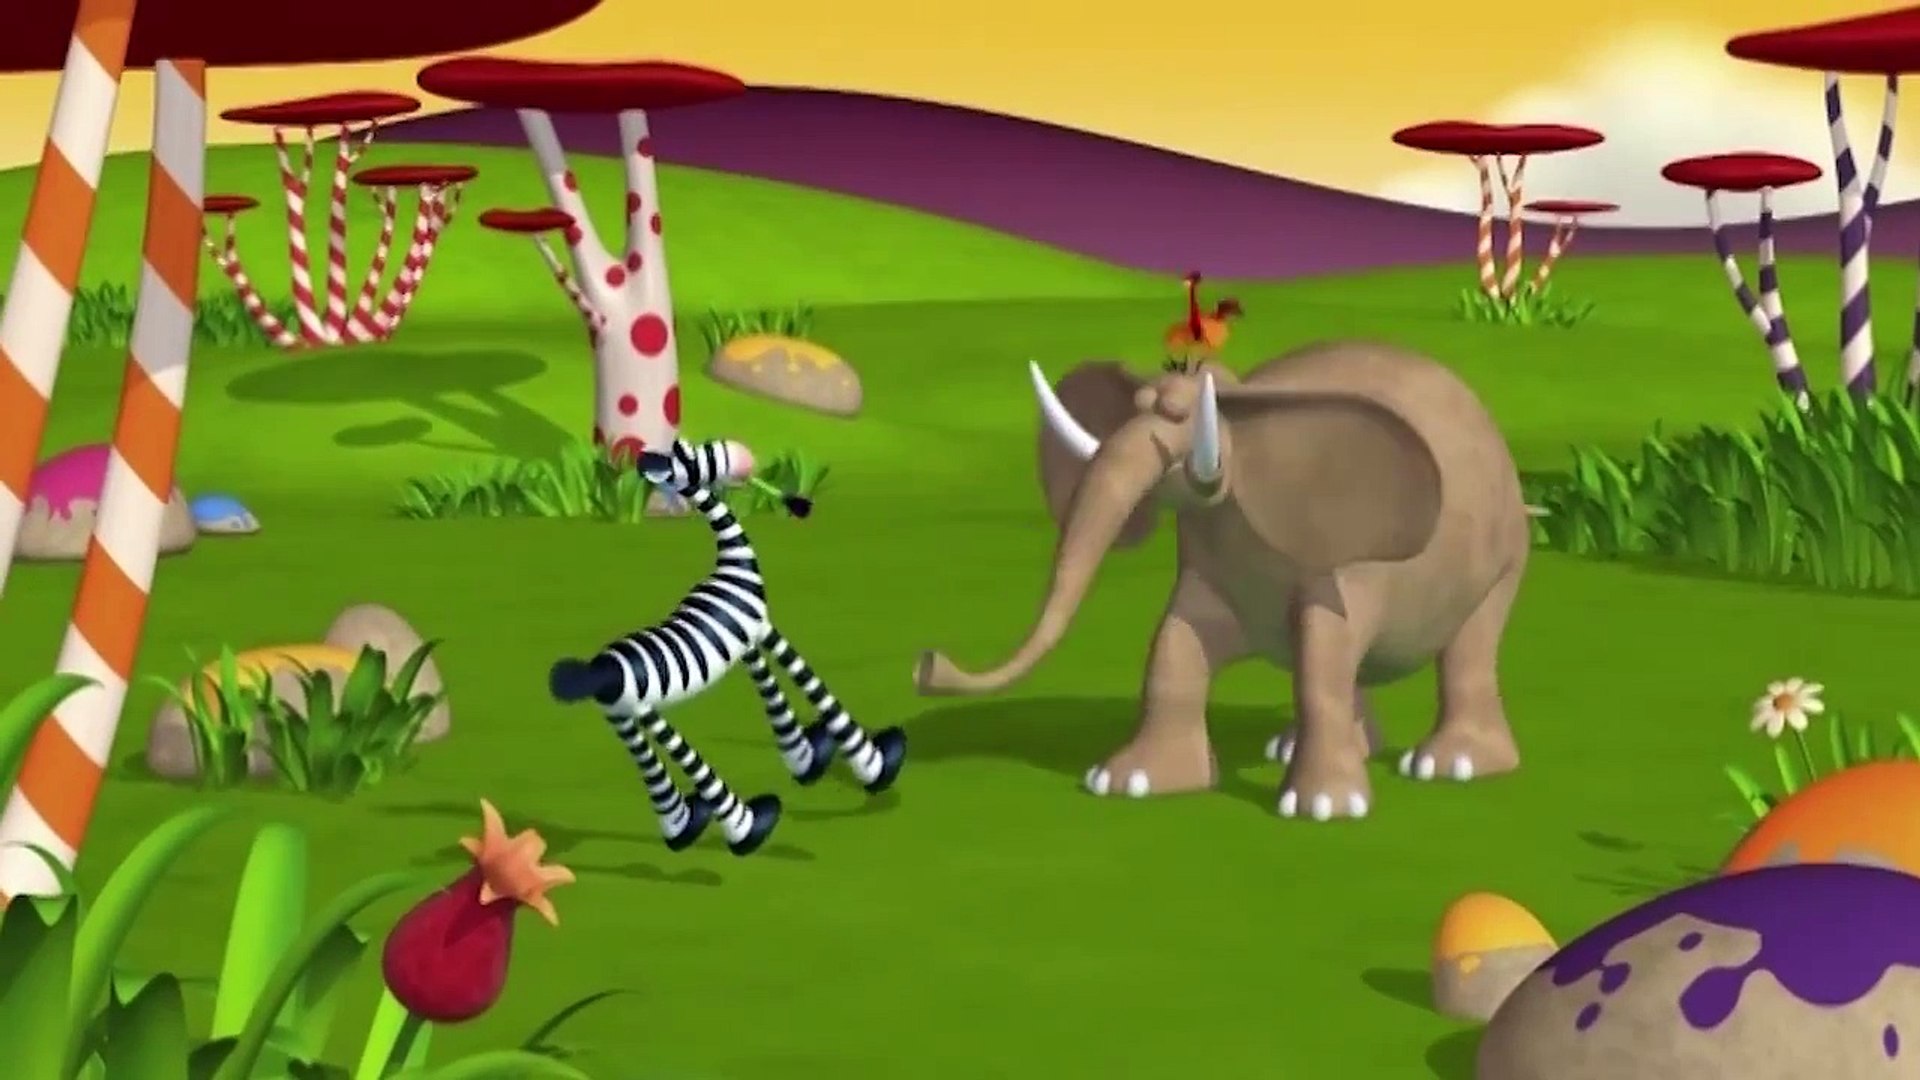 Funny Animals Cartoons Compilation Just for Kids Enjoyment!!!.mp4 - video  Dailymotion